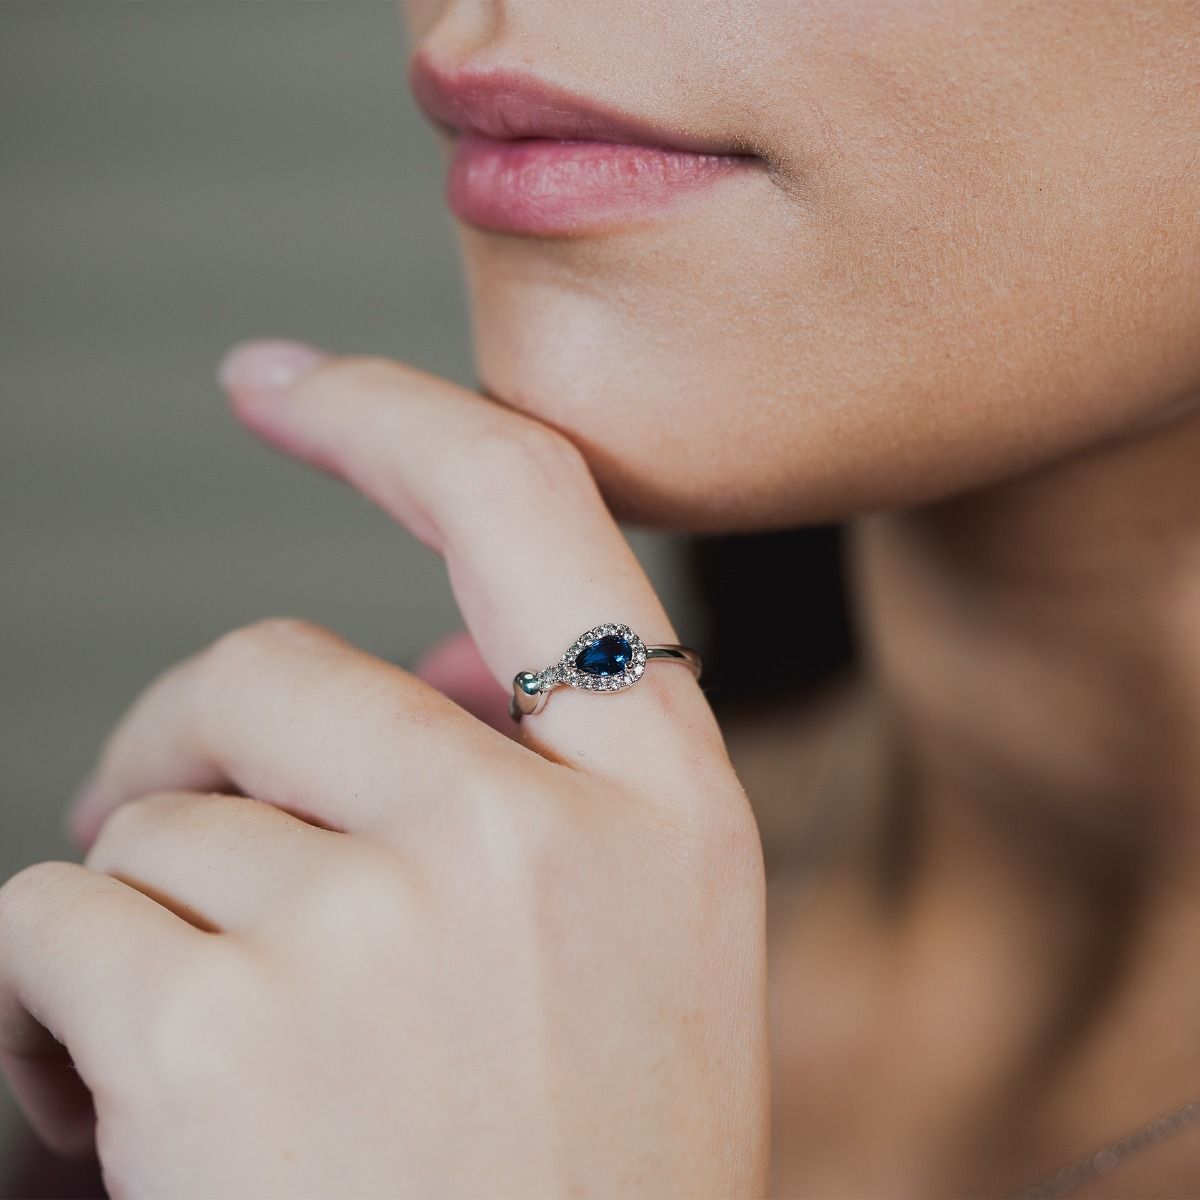 Discover elegance with our Sapphire Heart Pear-Drop Ring. Enhanced by cubic zirconia pear-drop band, it features a polished heart at the peak of the pear. The enchanting focal point is a captivating sapphire stone, which sits on a polished band.